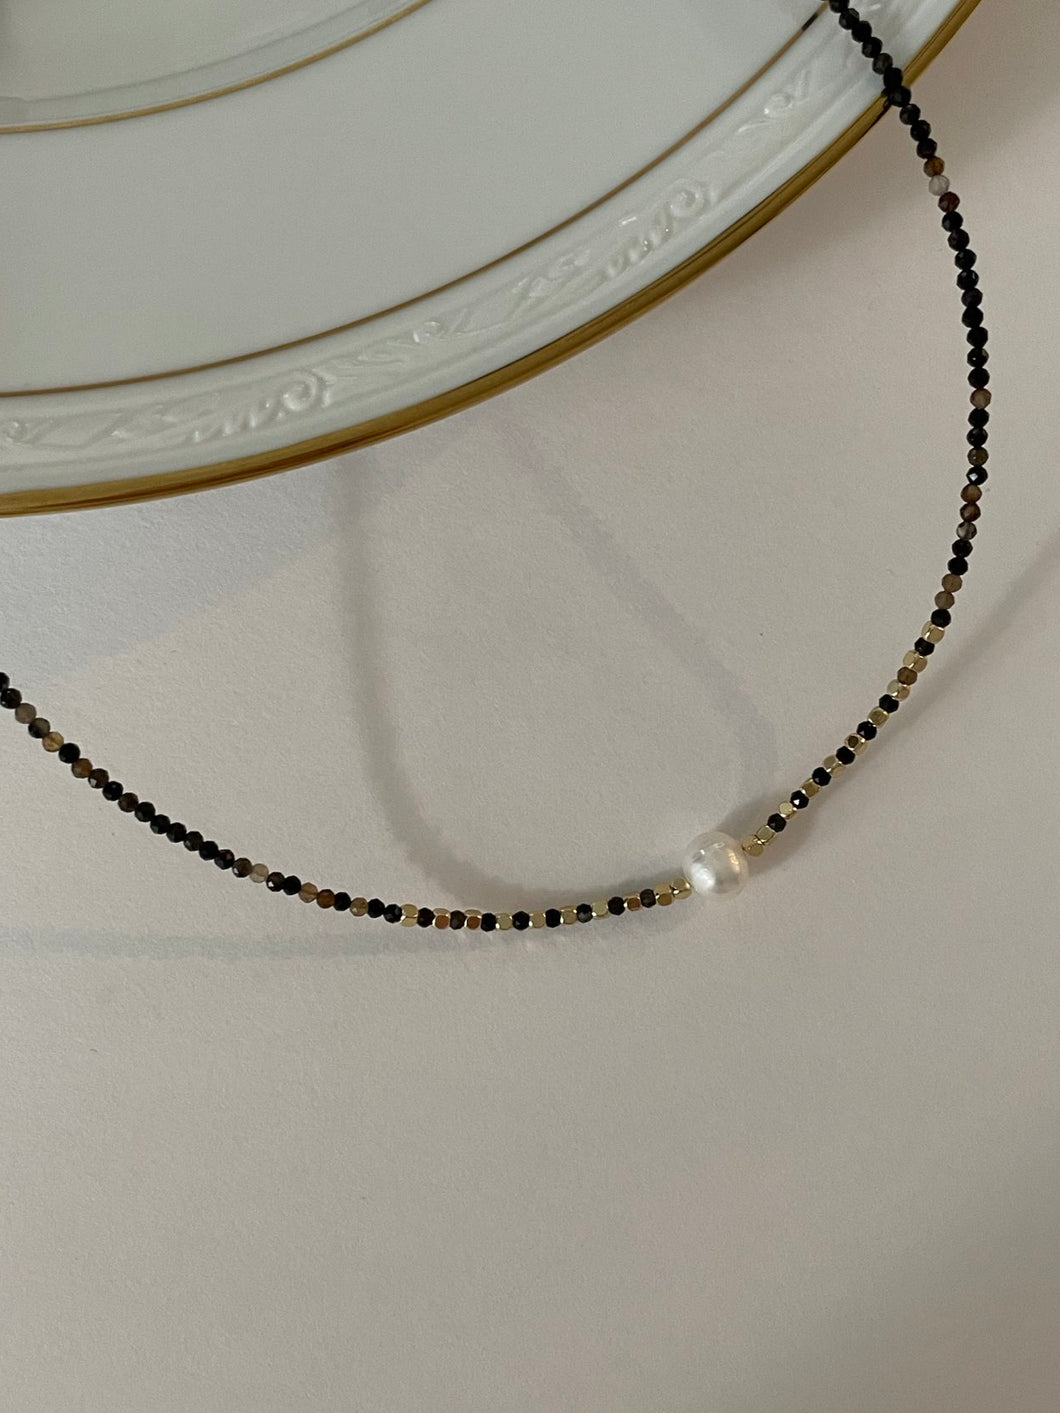 Pearl and Seed Bead Necklace